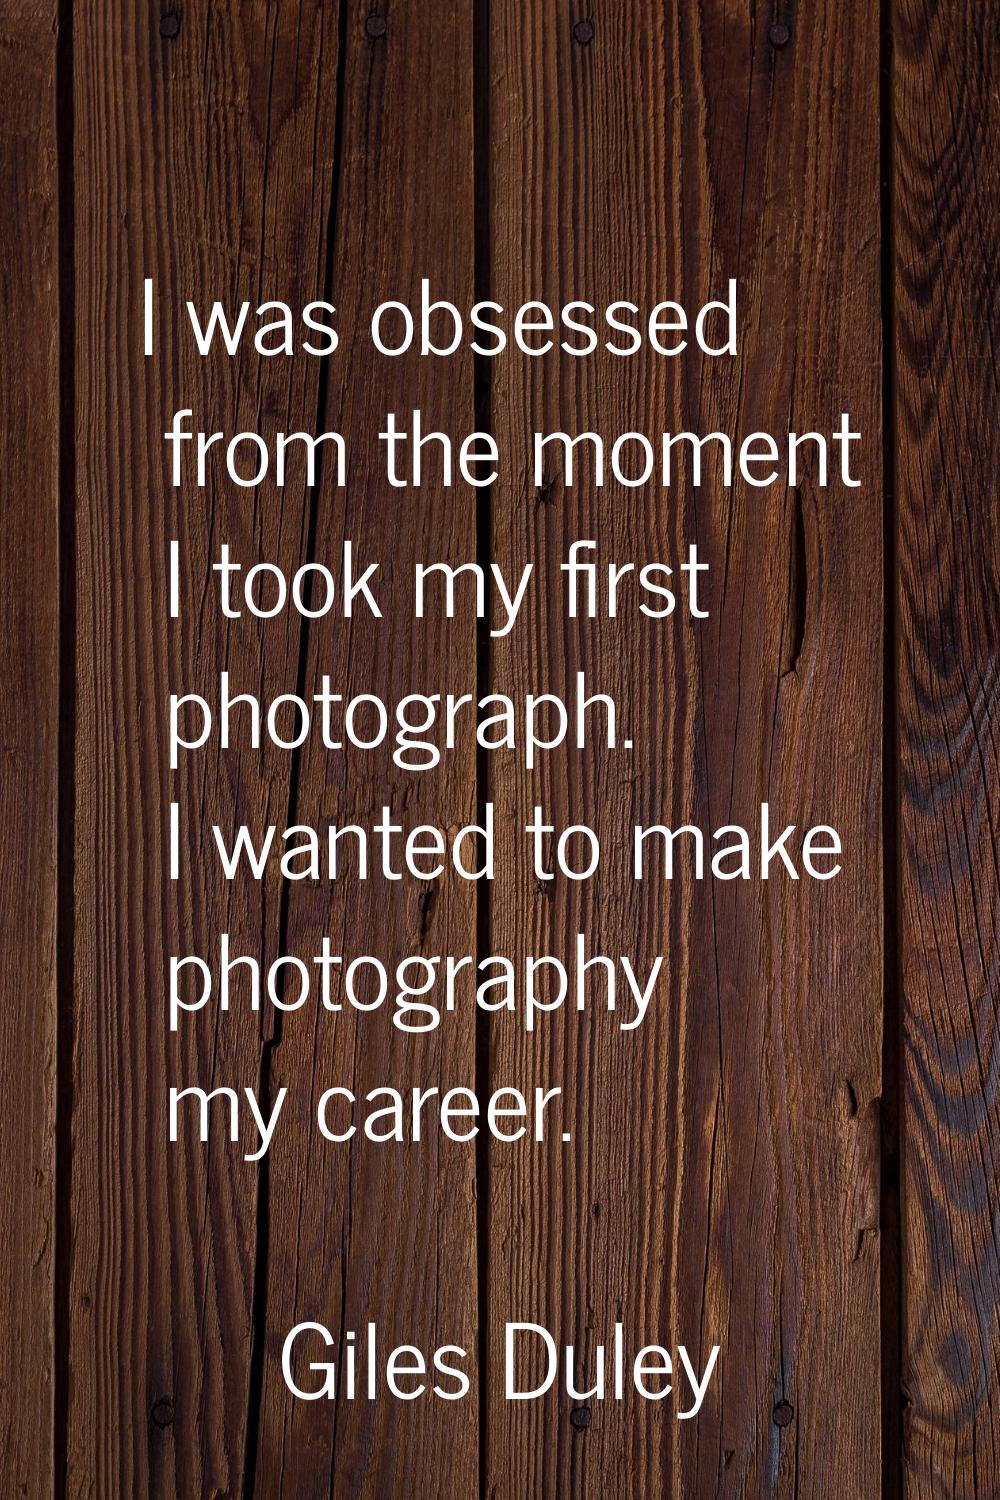 I was obsessed from the moment I took my first photograph. I wanted to make photography my career.